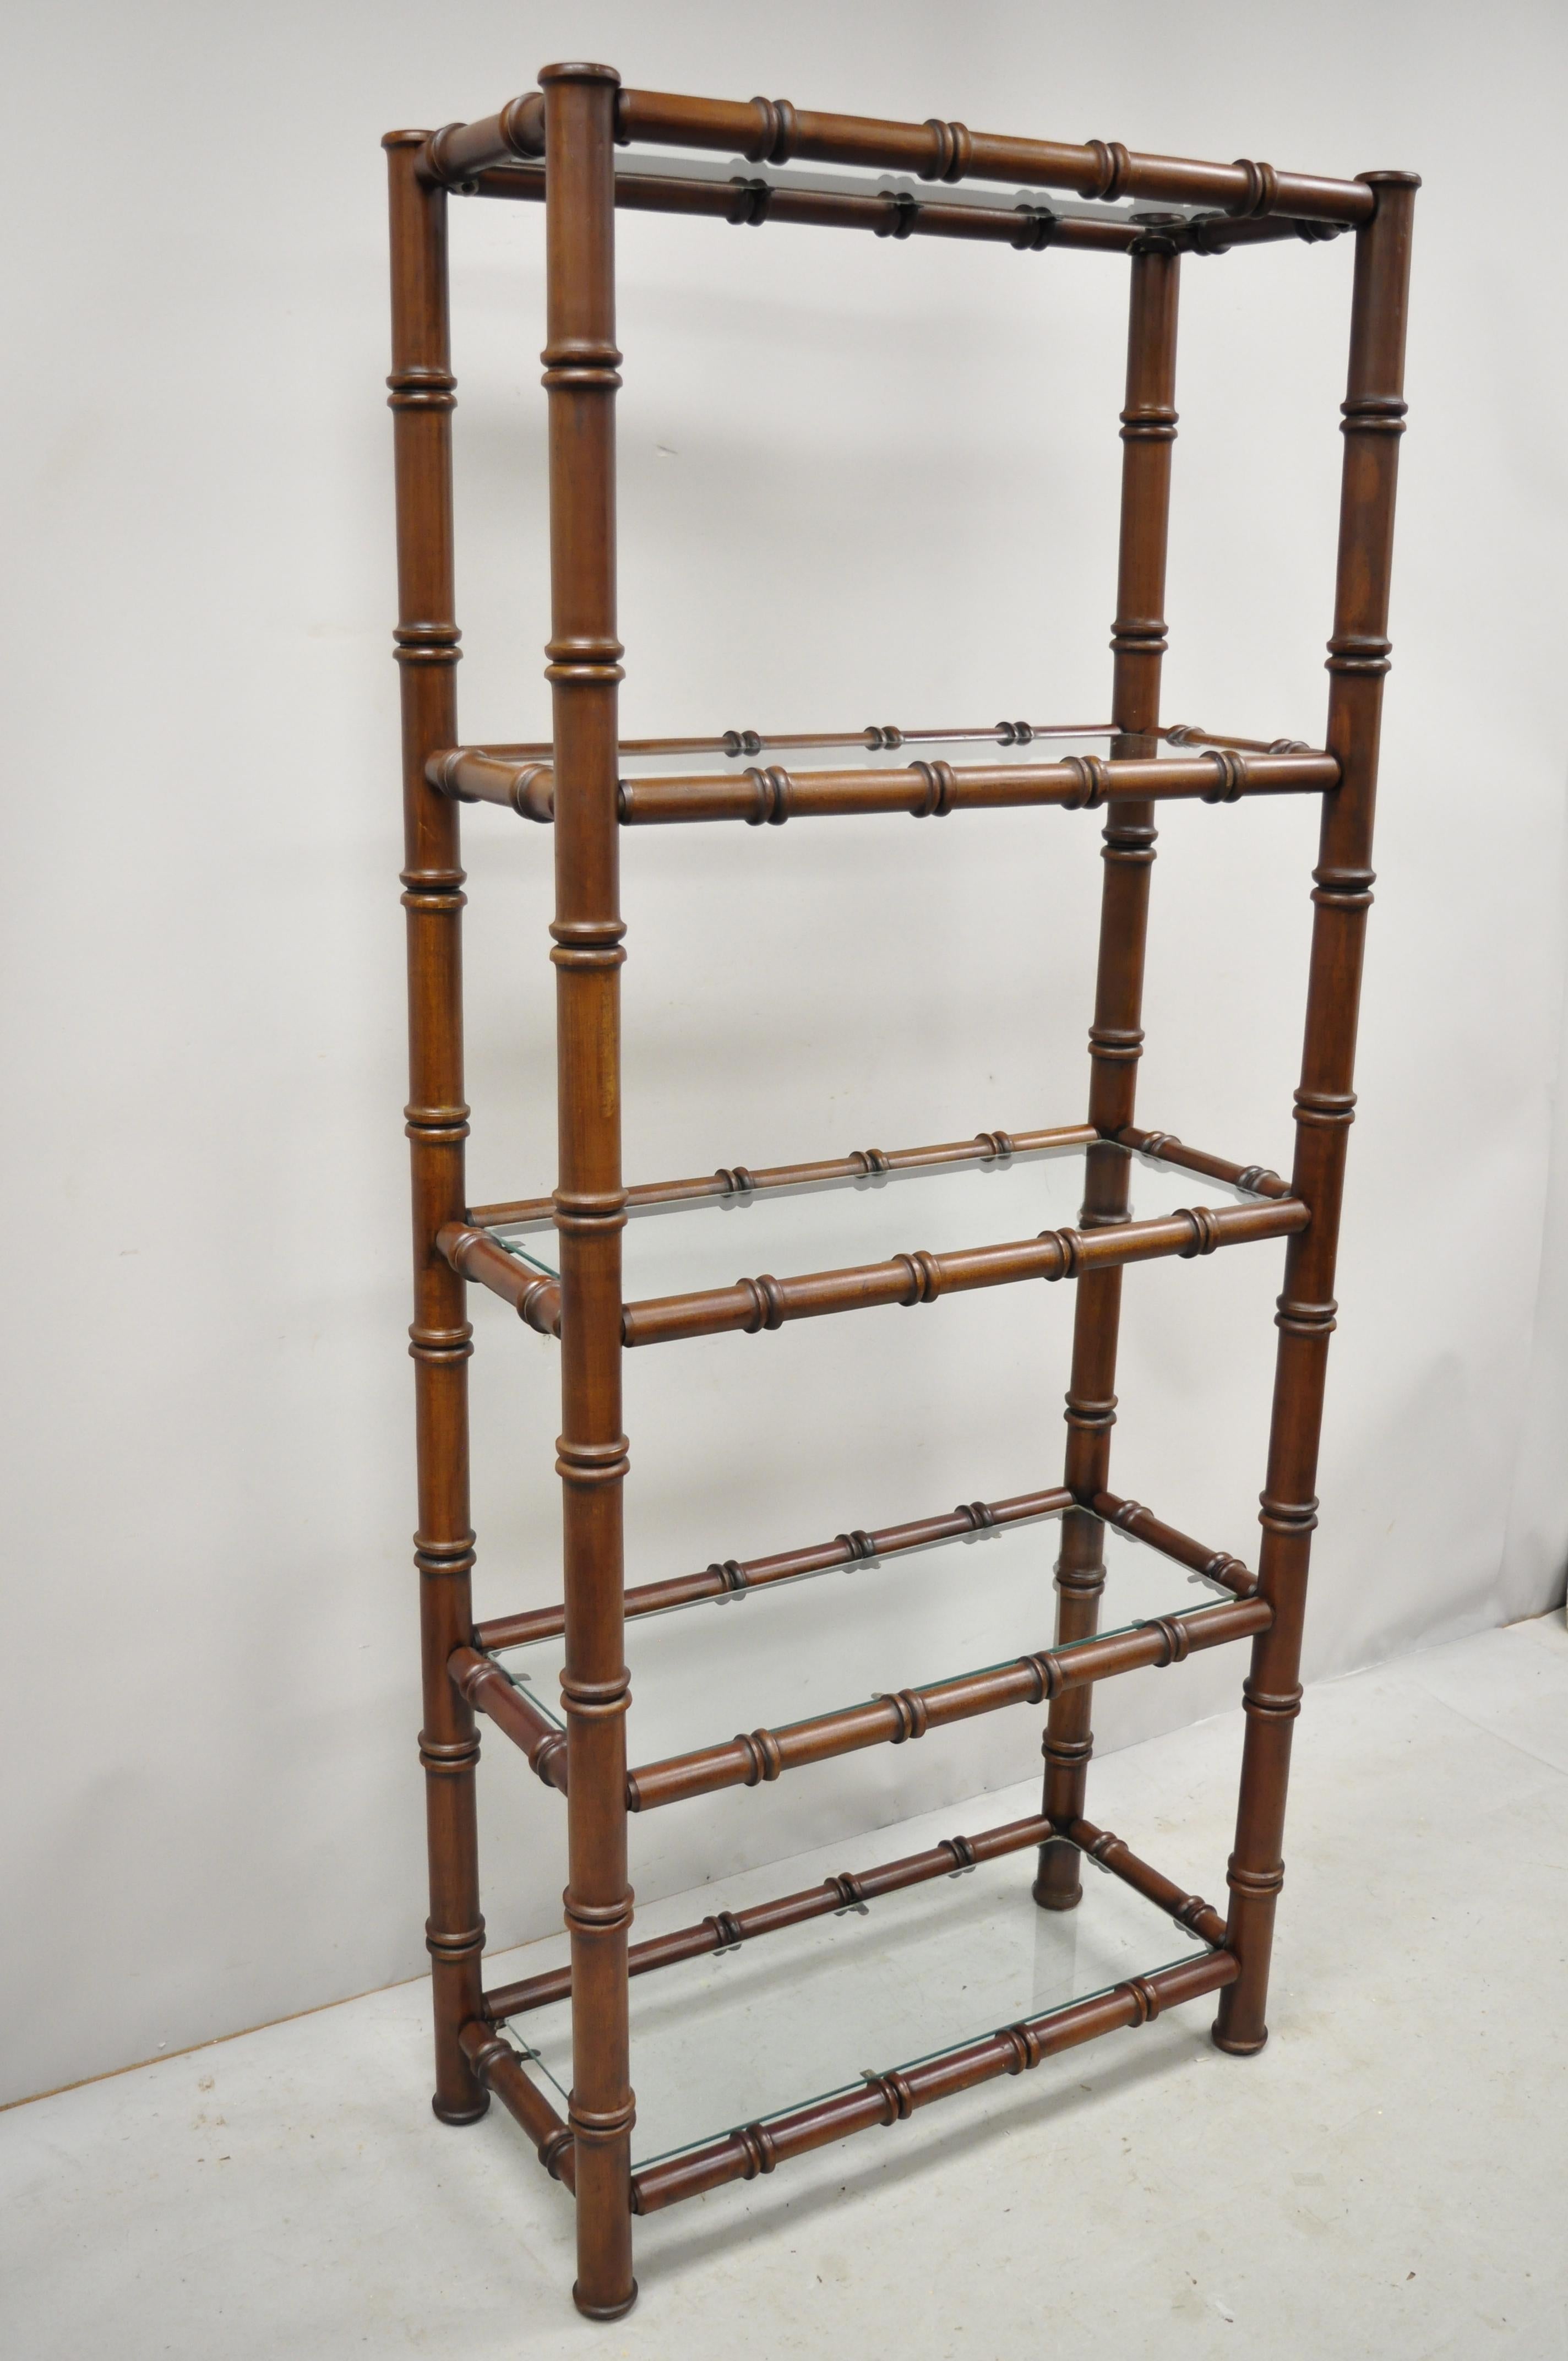 Vintage faux bamboo Hollywood Regency Chinese Chippendale wood and glass étagère stand. Item features a faux bamboo carved wood frame, beautiful wood grain, 5 glass shelves, great style and form, circa mid-20th century. Measurements: 72.5